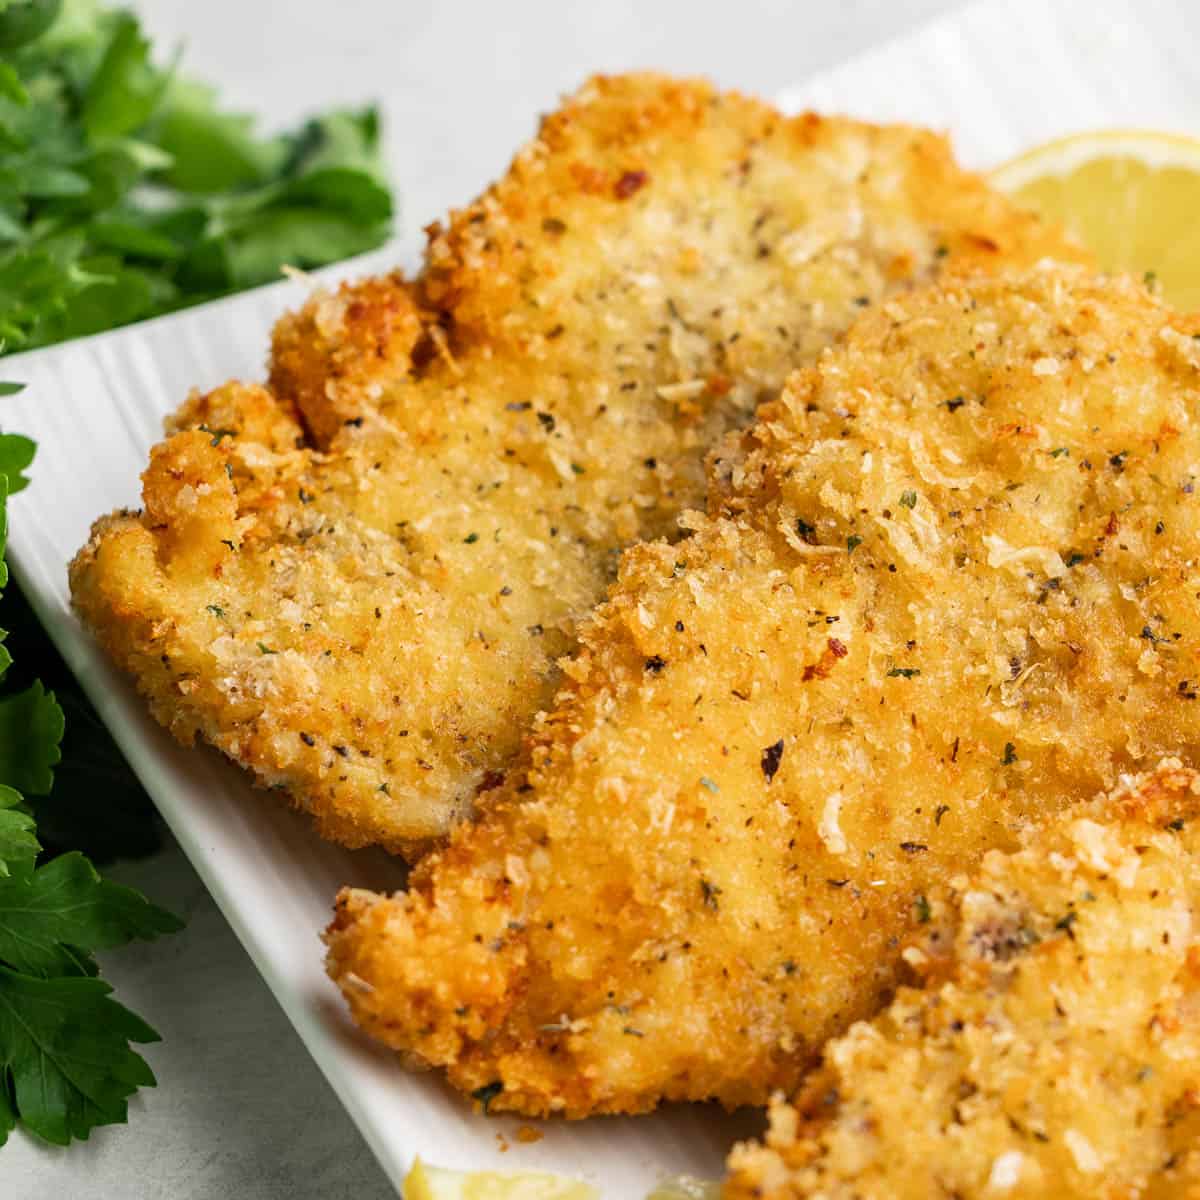 Parmesan crusted chicken.